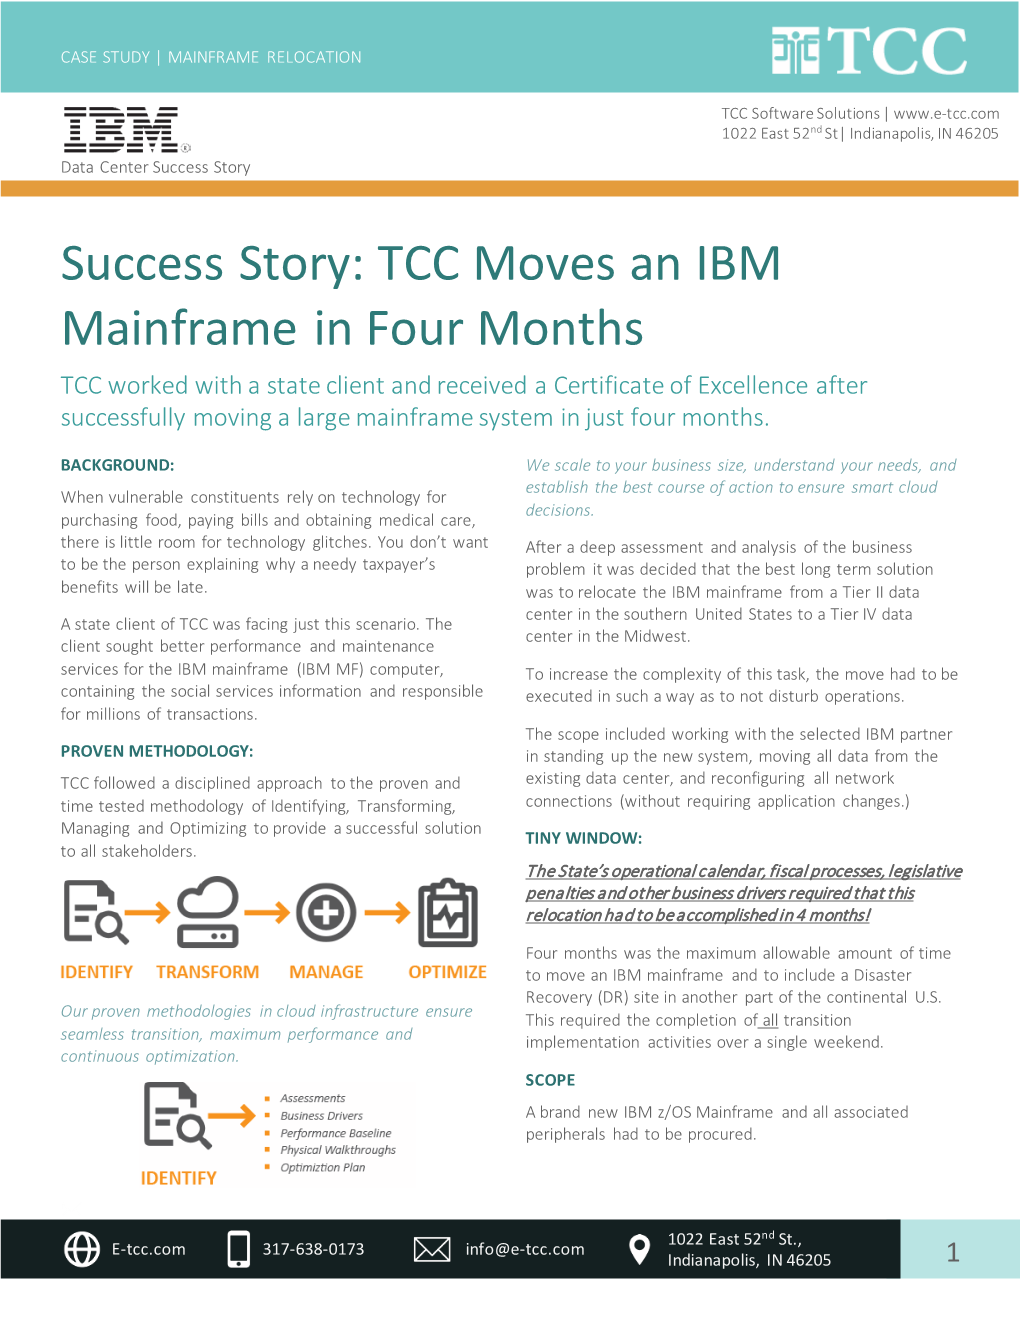 Success Story: TCC Moves an IBM Mainframe in Four Months